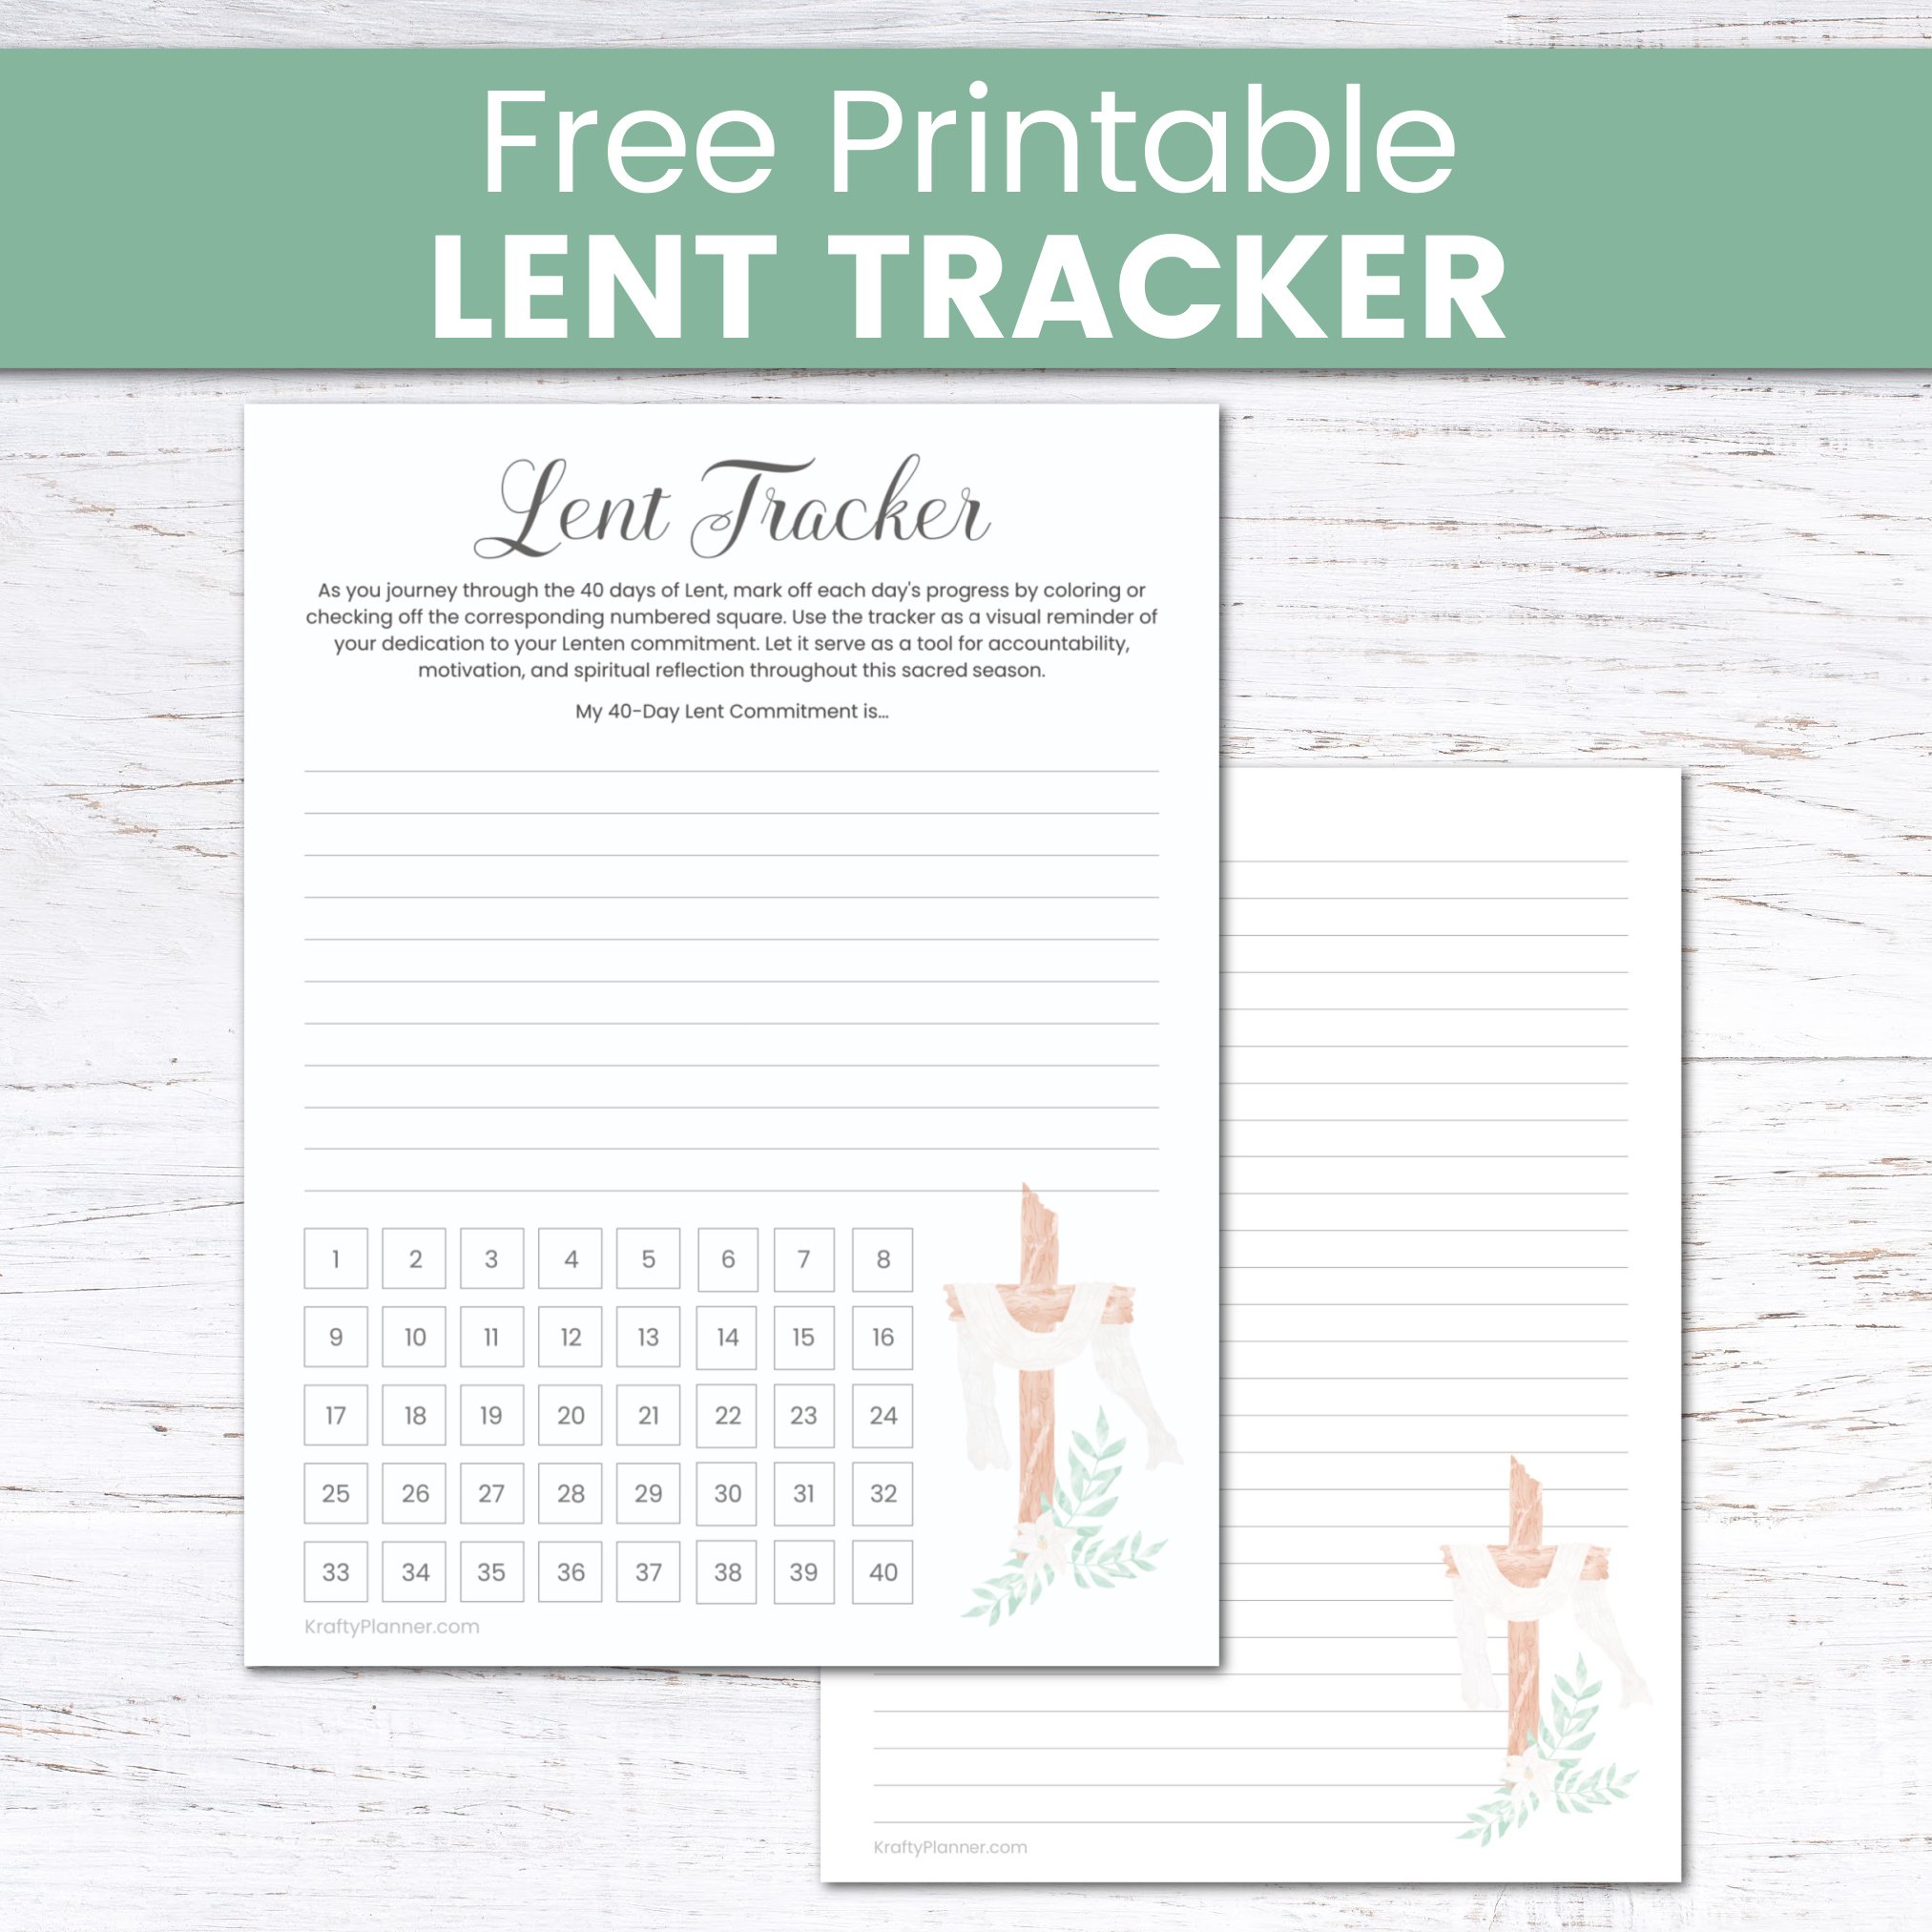 Free Printable Lent Tracker and Journal Page